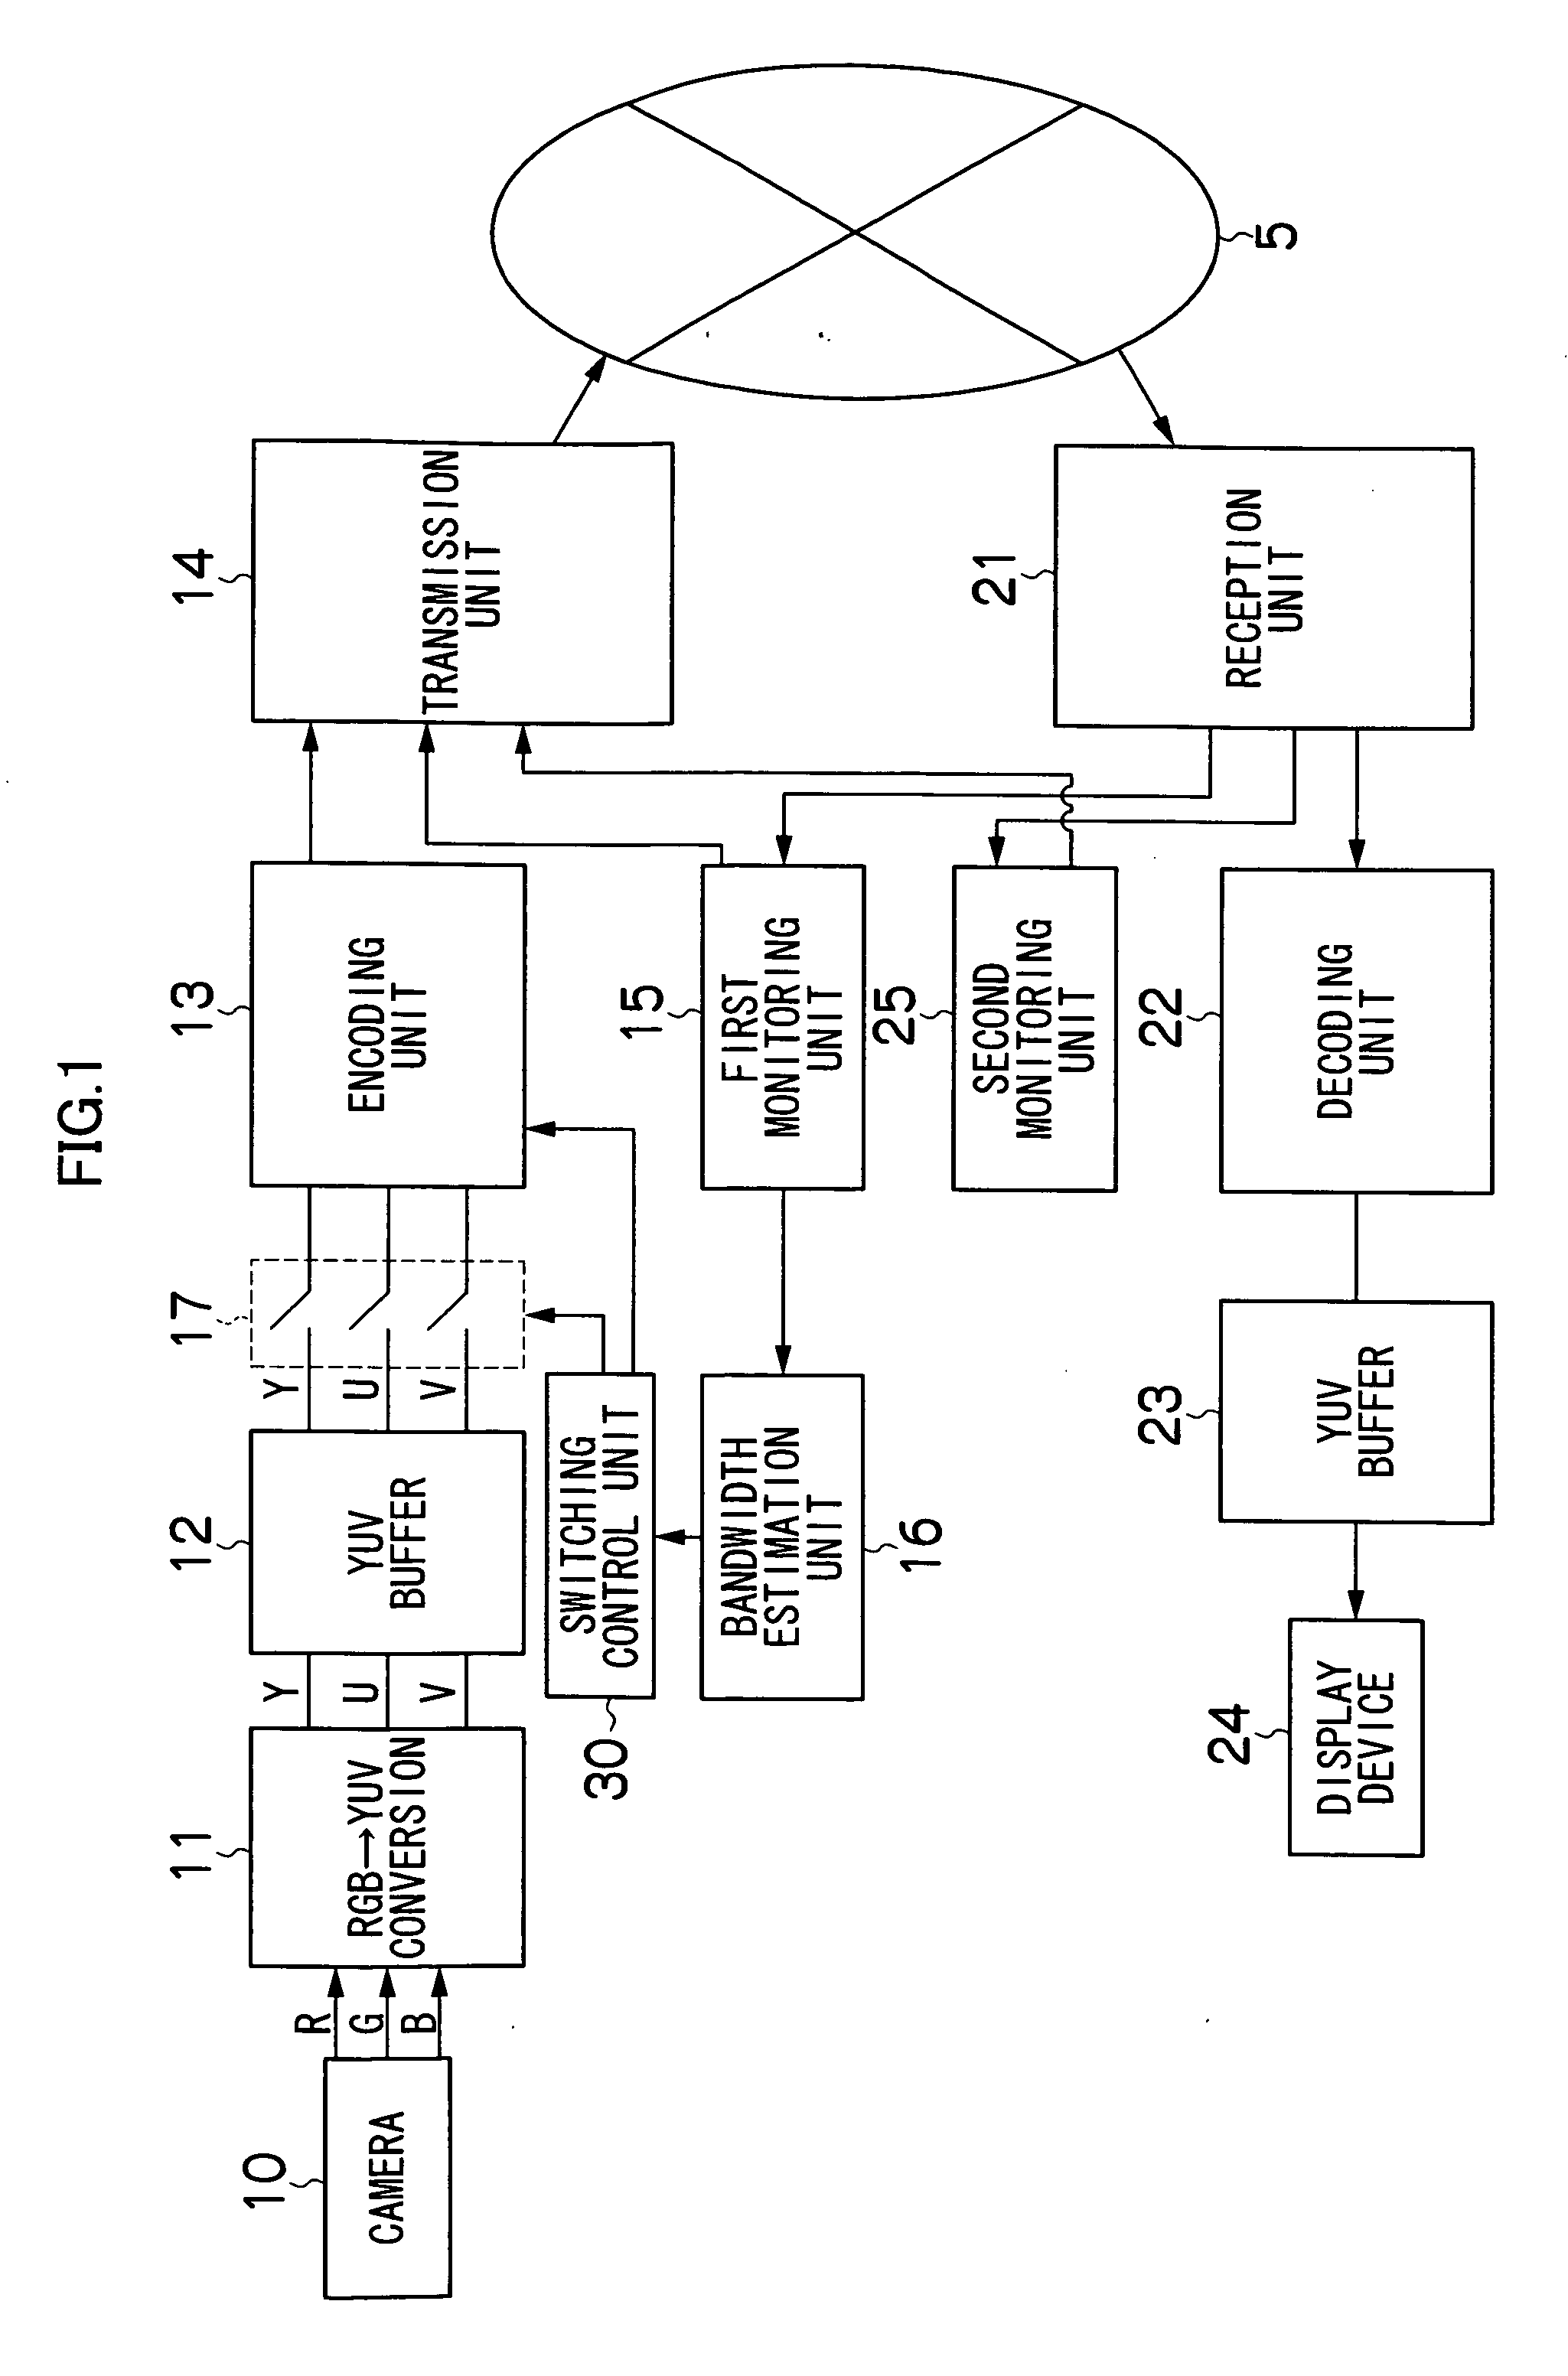 Moving picture real-time communications terminal, control method for moving picture real-time communications terminal, and control program for moving picture real-time communications terminal